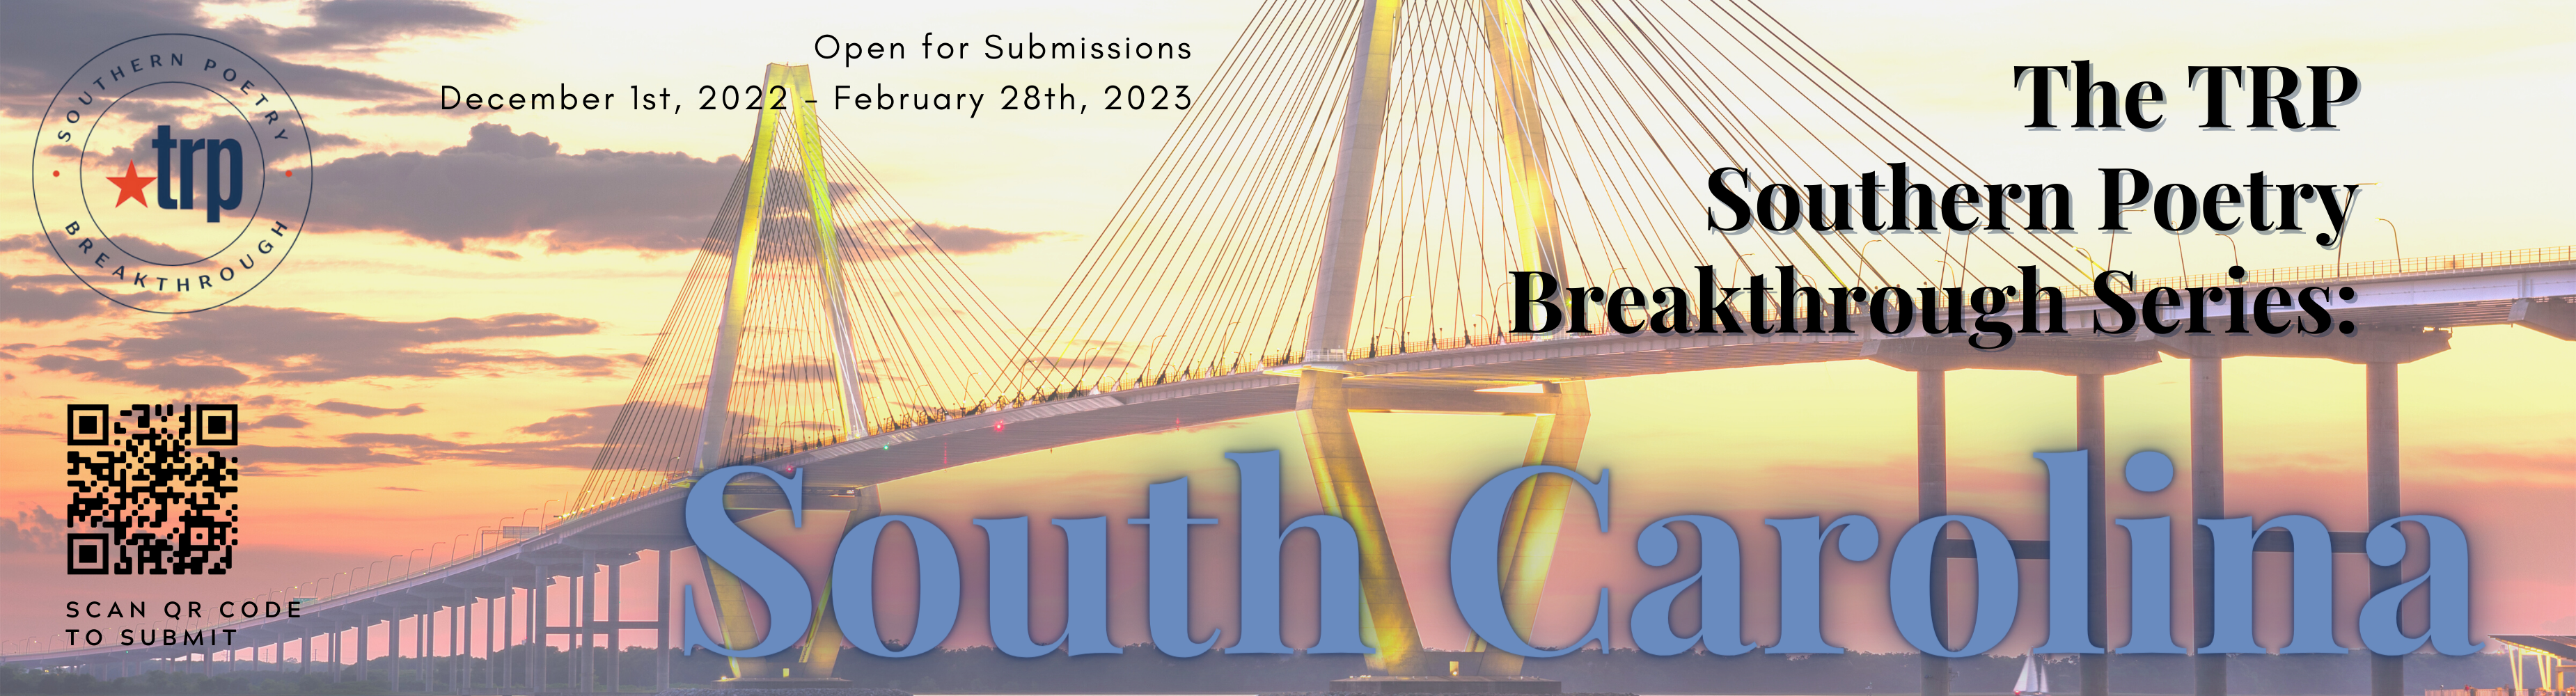 Text: The TRP Southern Poetry Breakthrough Series: South Carolina. Open for Submissions December 1st, 2022 - February 28th, 2023. Image: Pale sunrise over the Arthur Ravenel Jr. Bridge / Cooper River Bridge.